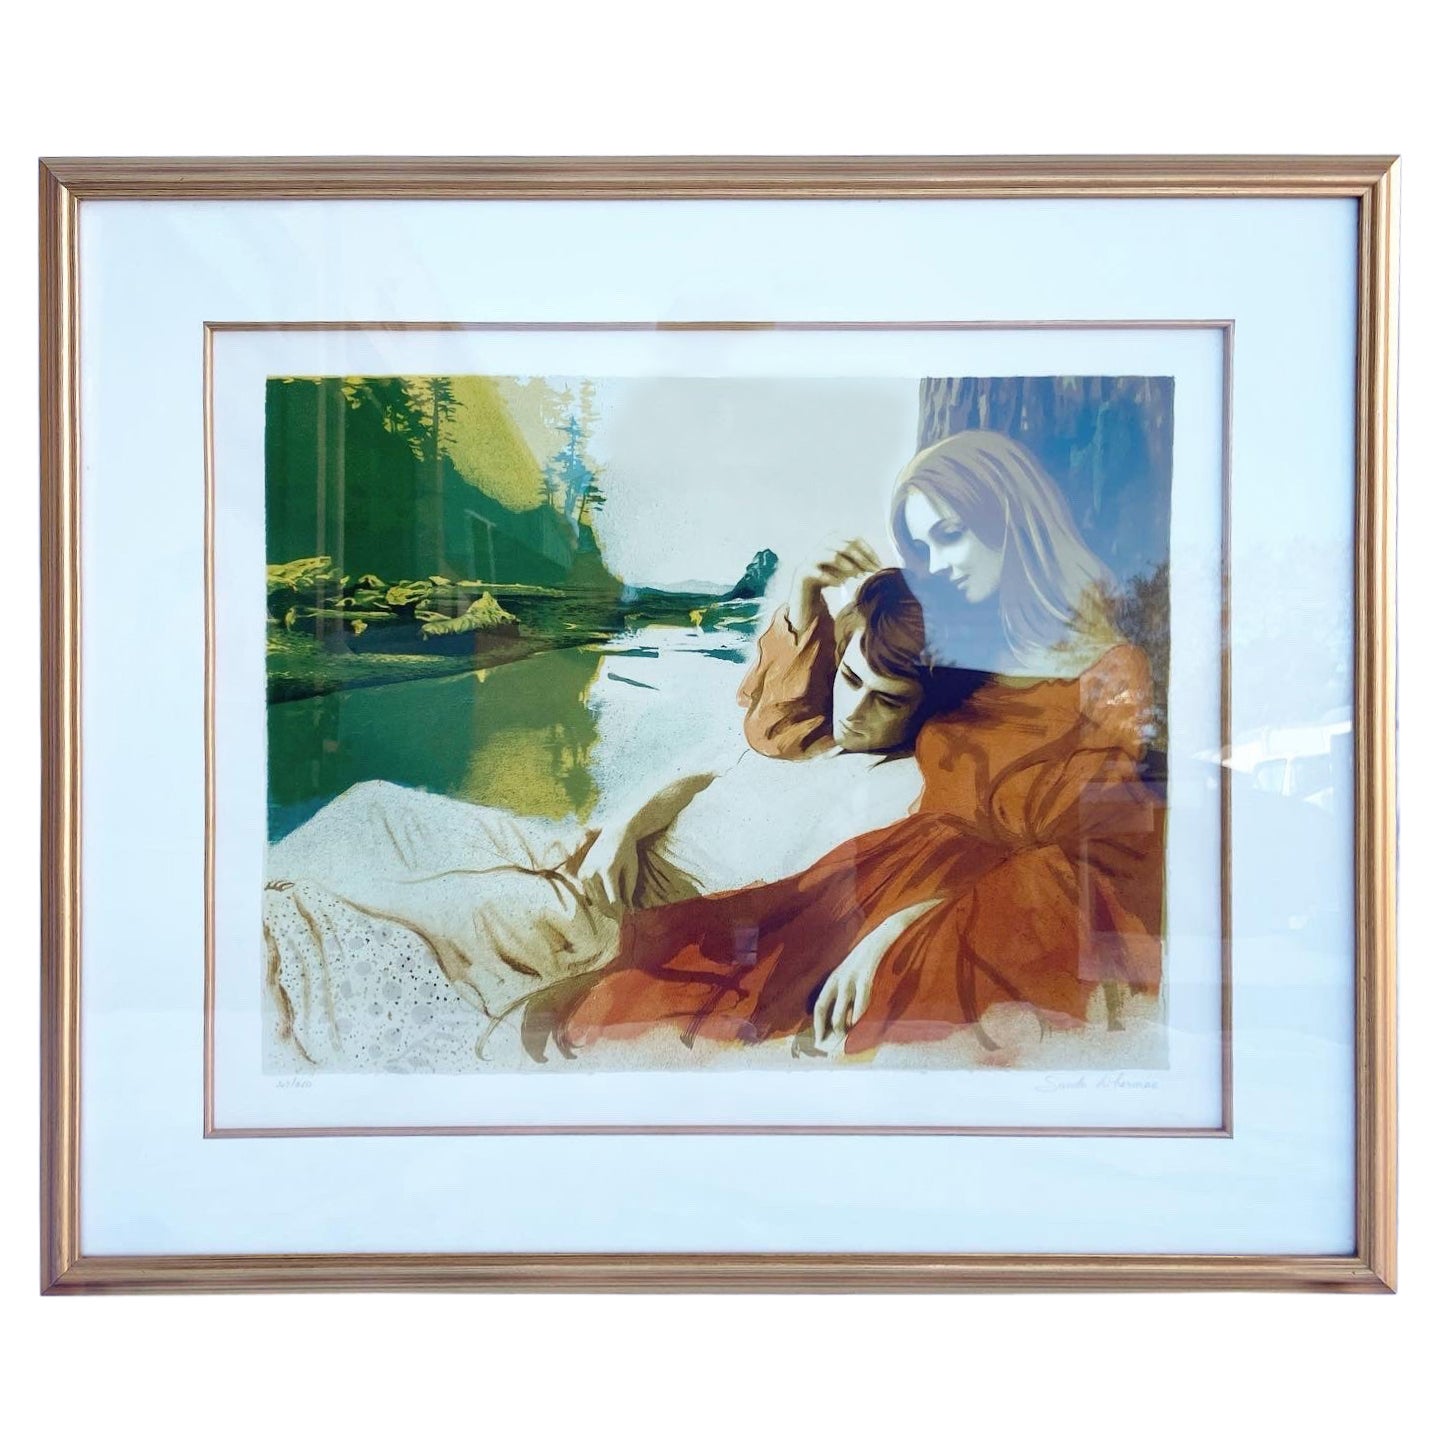 Tender Love, Framed and Signed Lithograph 207/250 by Sandu Liberman For Sale